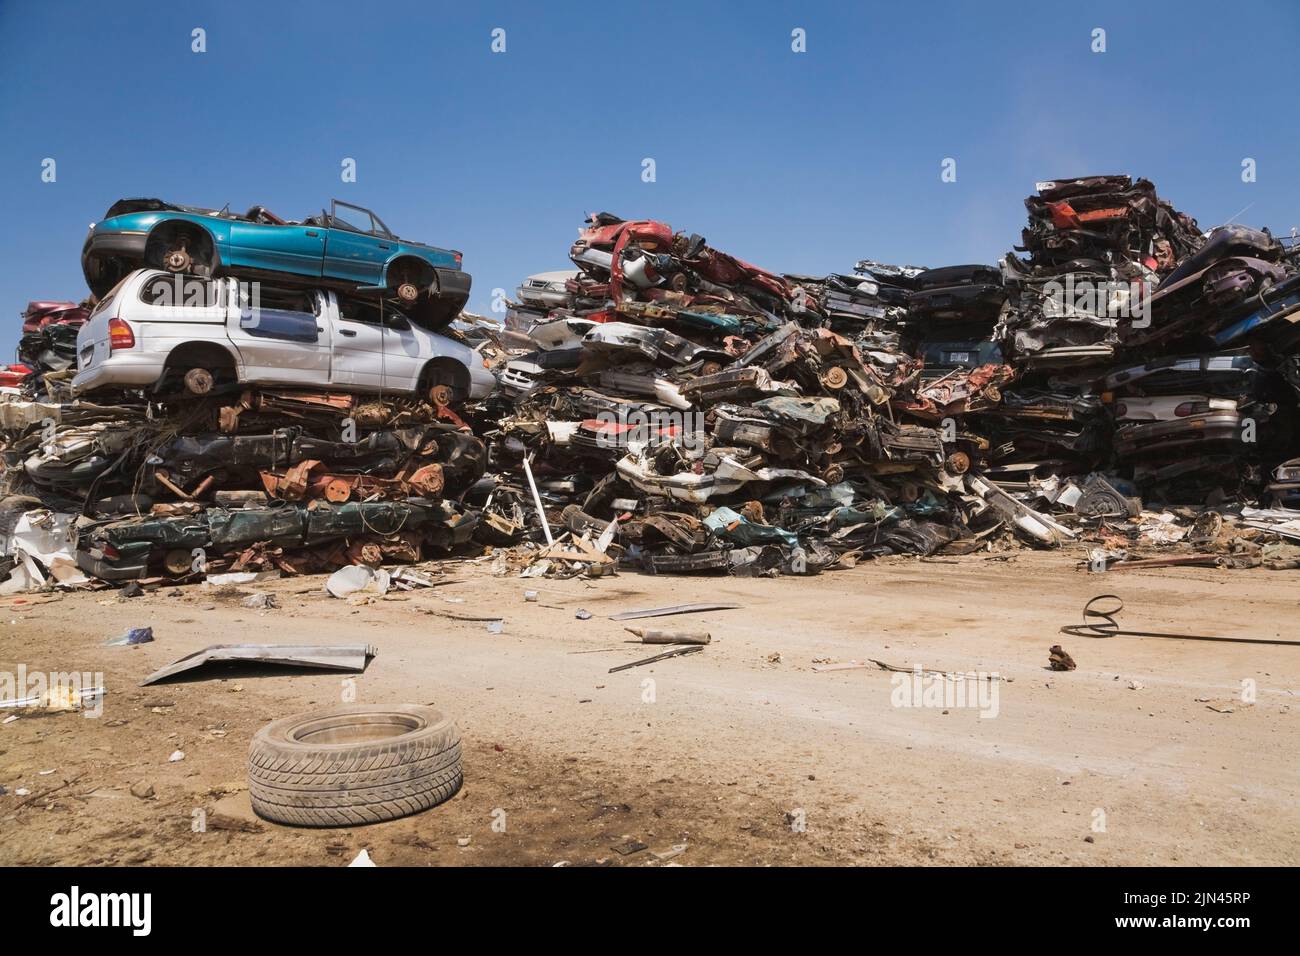 Stacked and crushed discarded automobiles at scrap metal recycling yard, Quebec, Canada Stock Photo